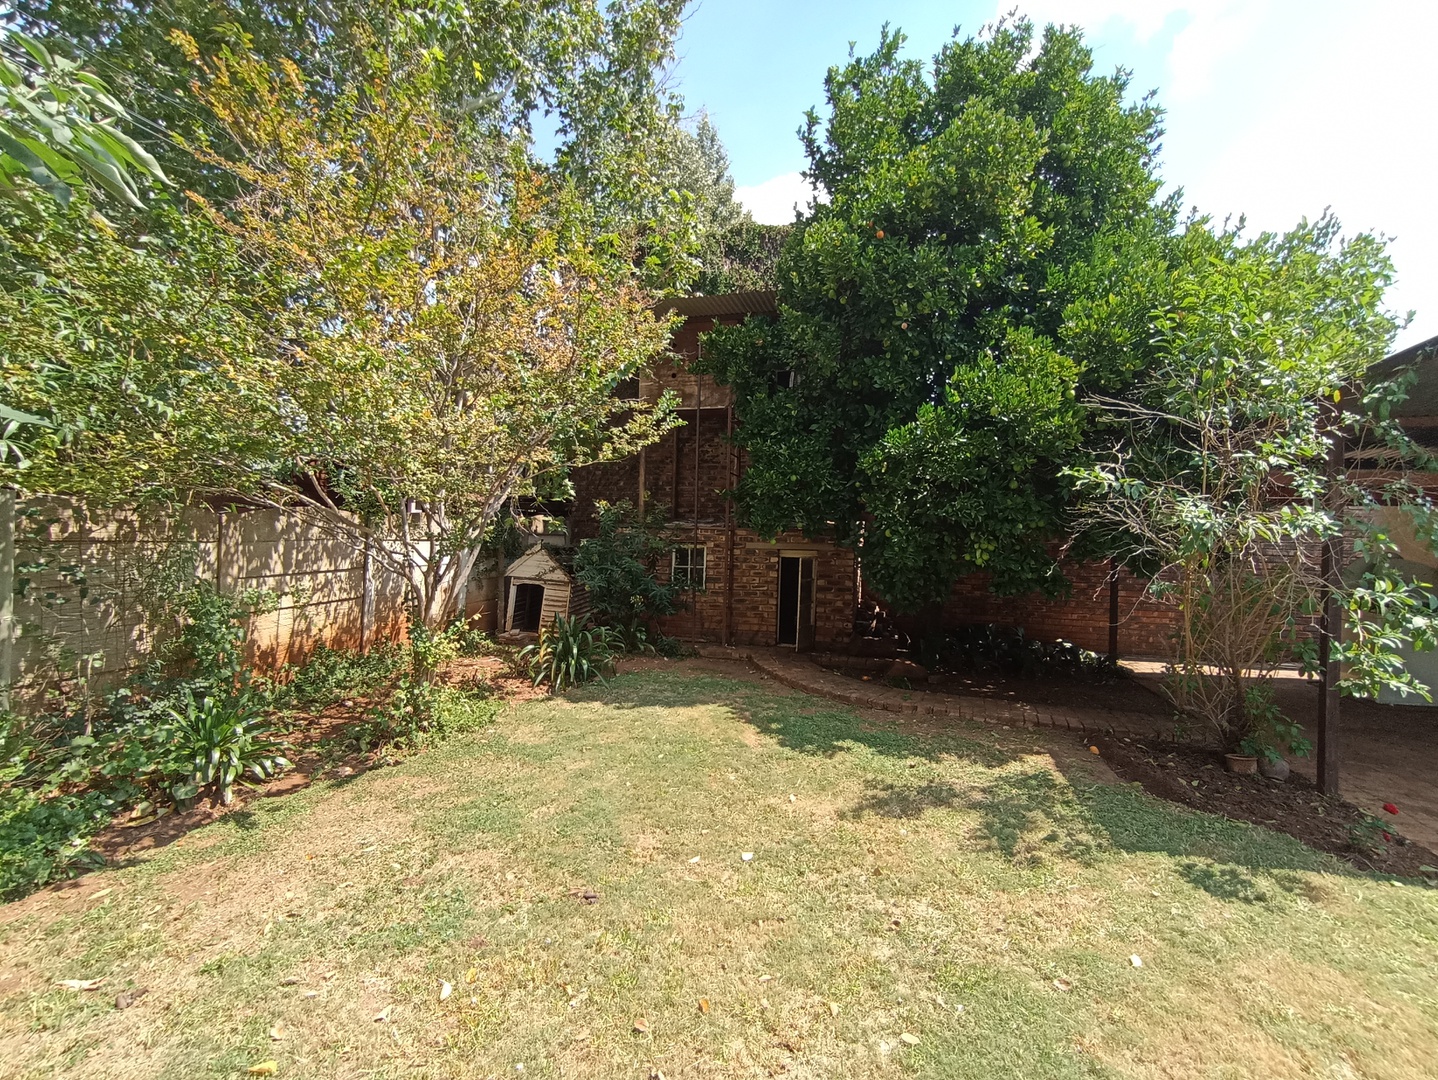 House in Potchefstroom Central - Garden tree house